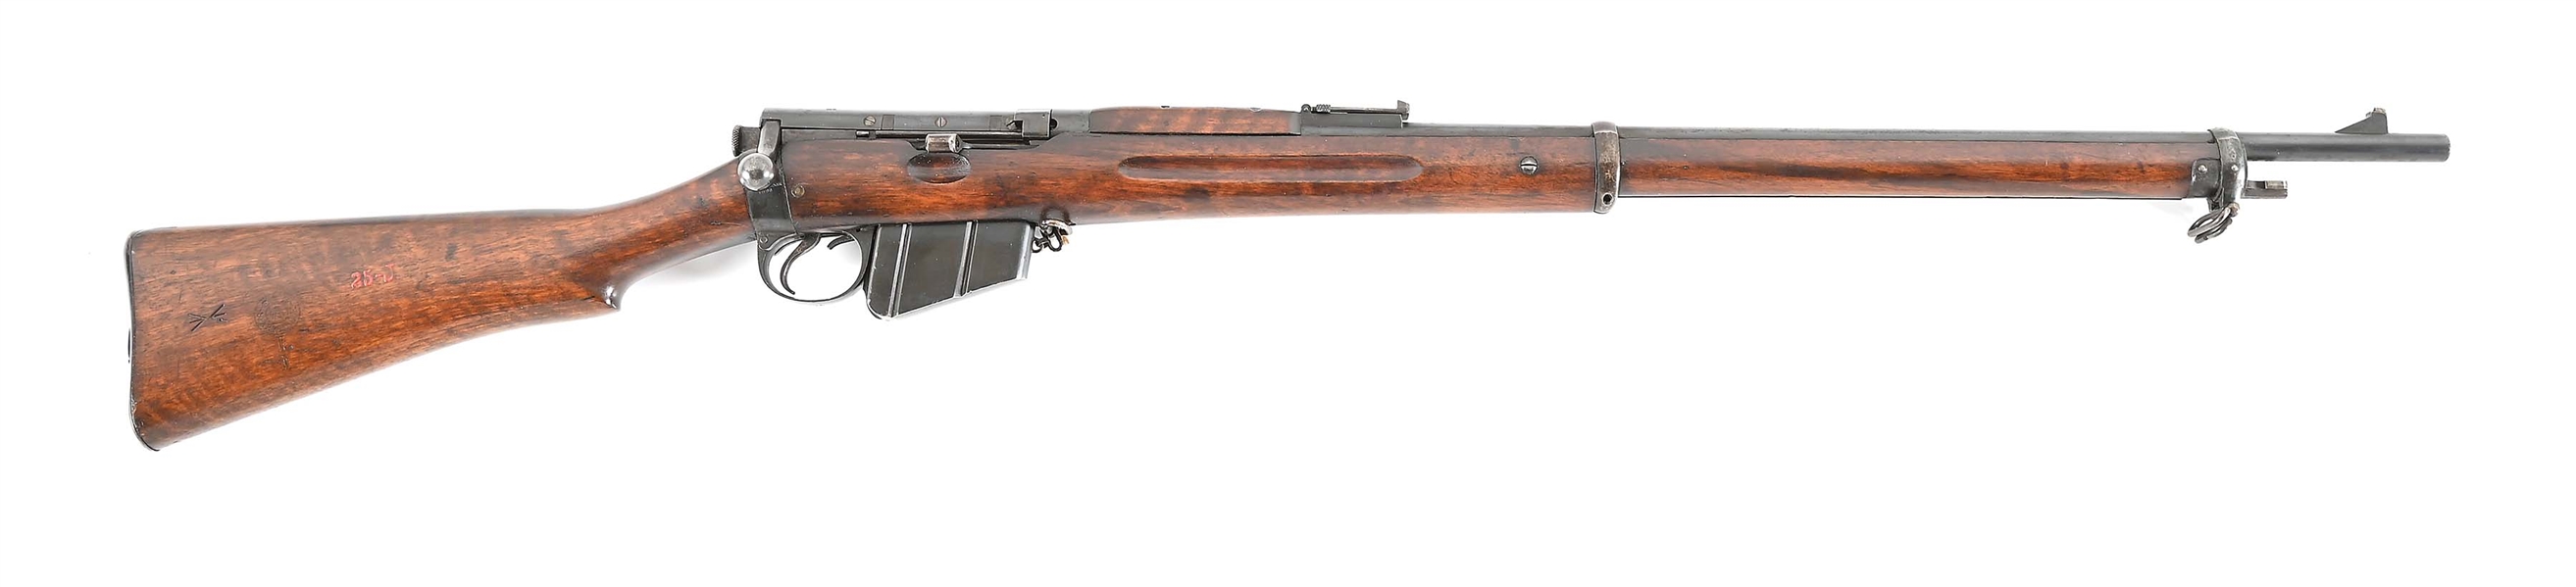 (A) FINE AND EARLY SPARKBROOK LEE-METFORD MK 1 BOLT ACTION RIFLE.